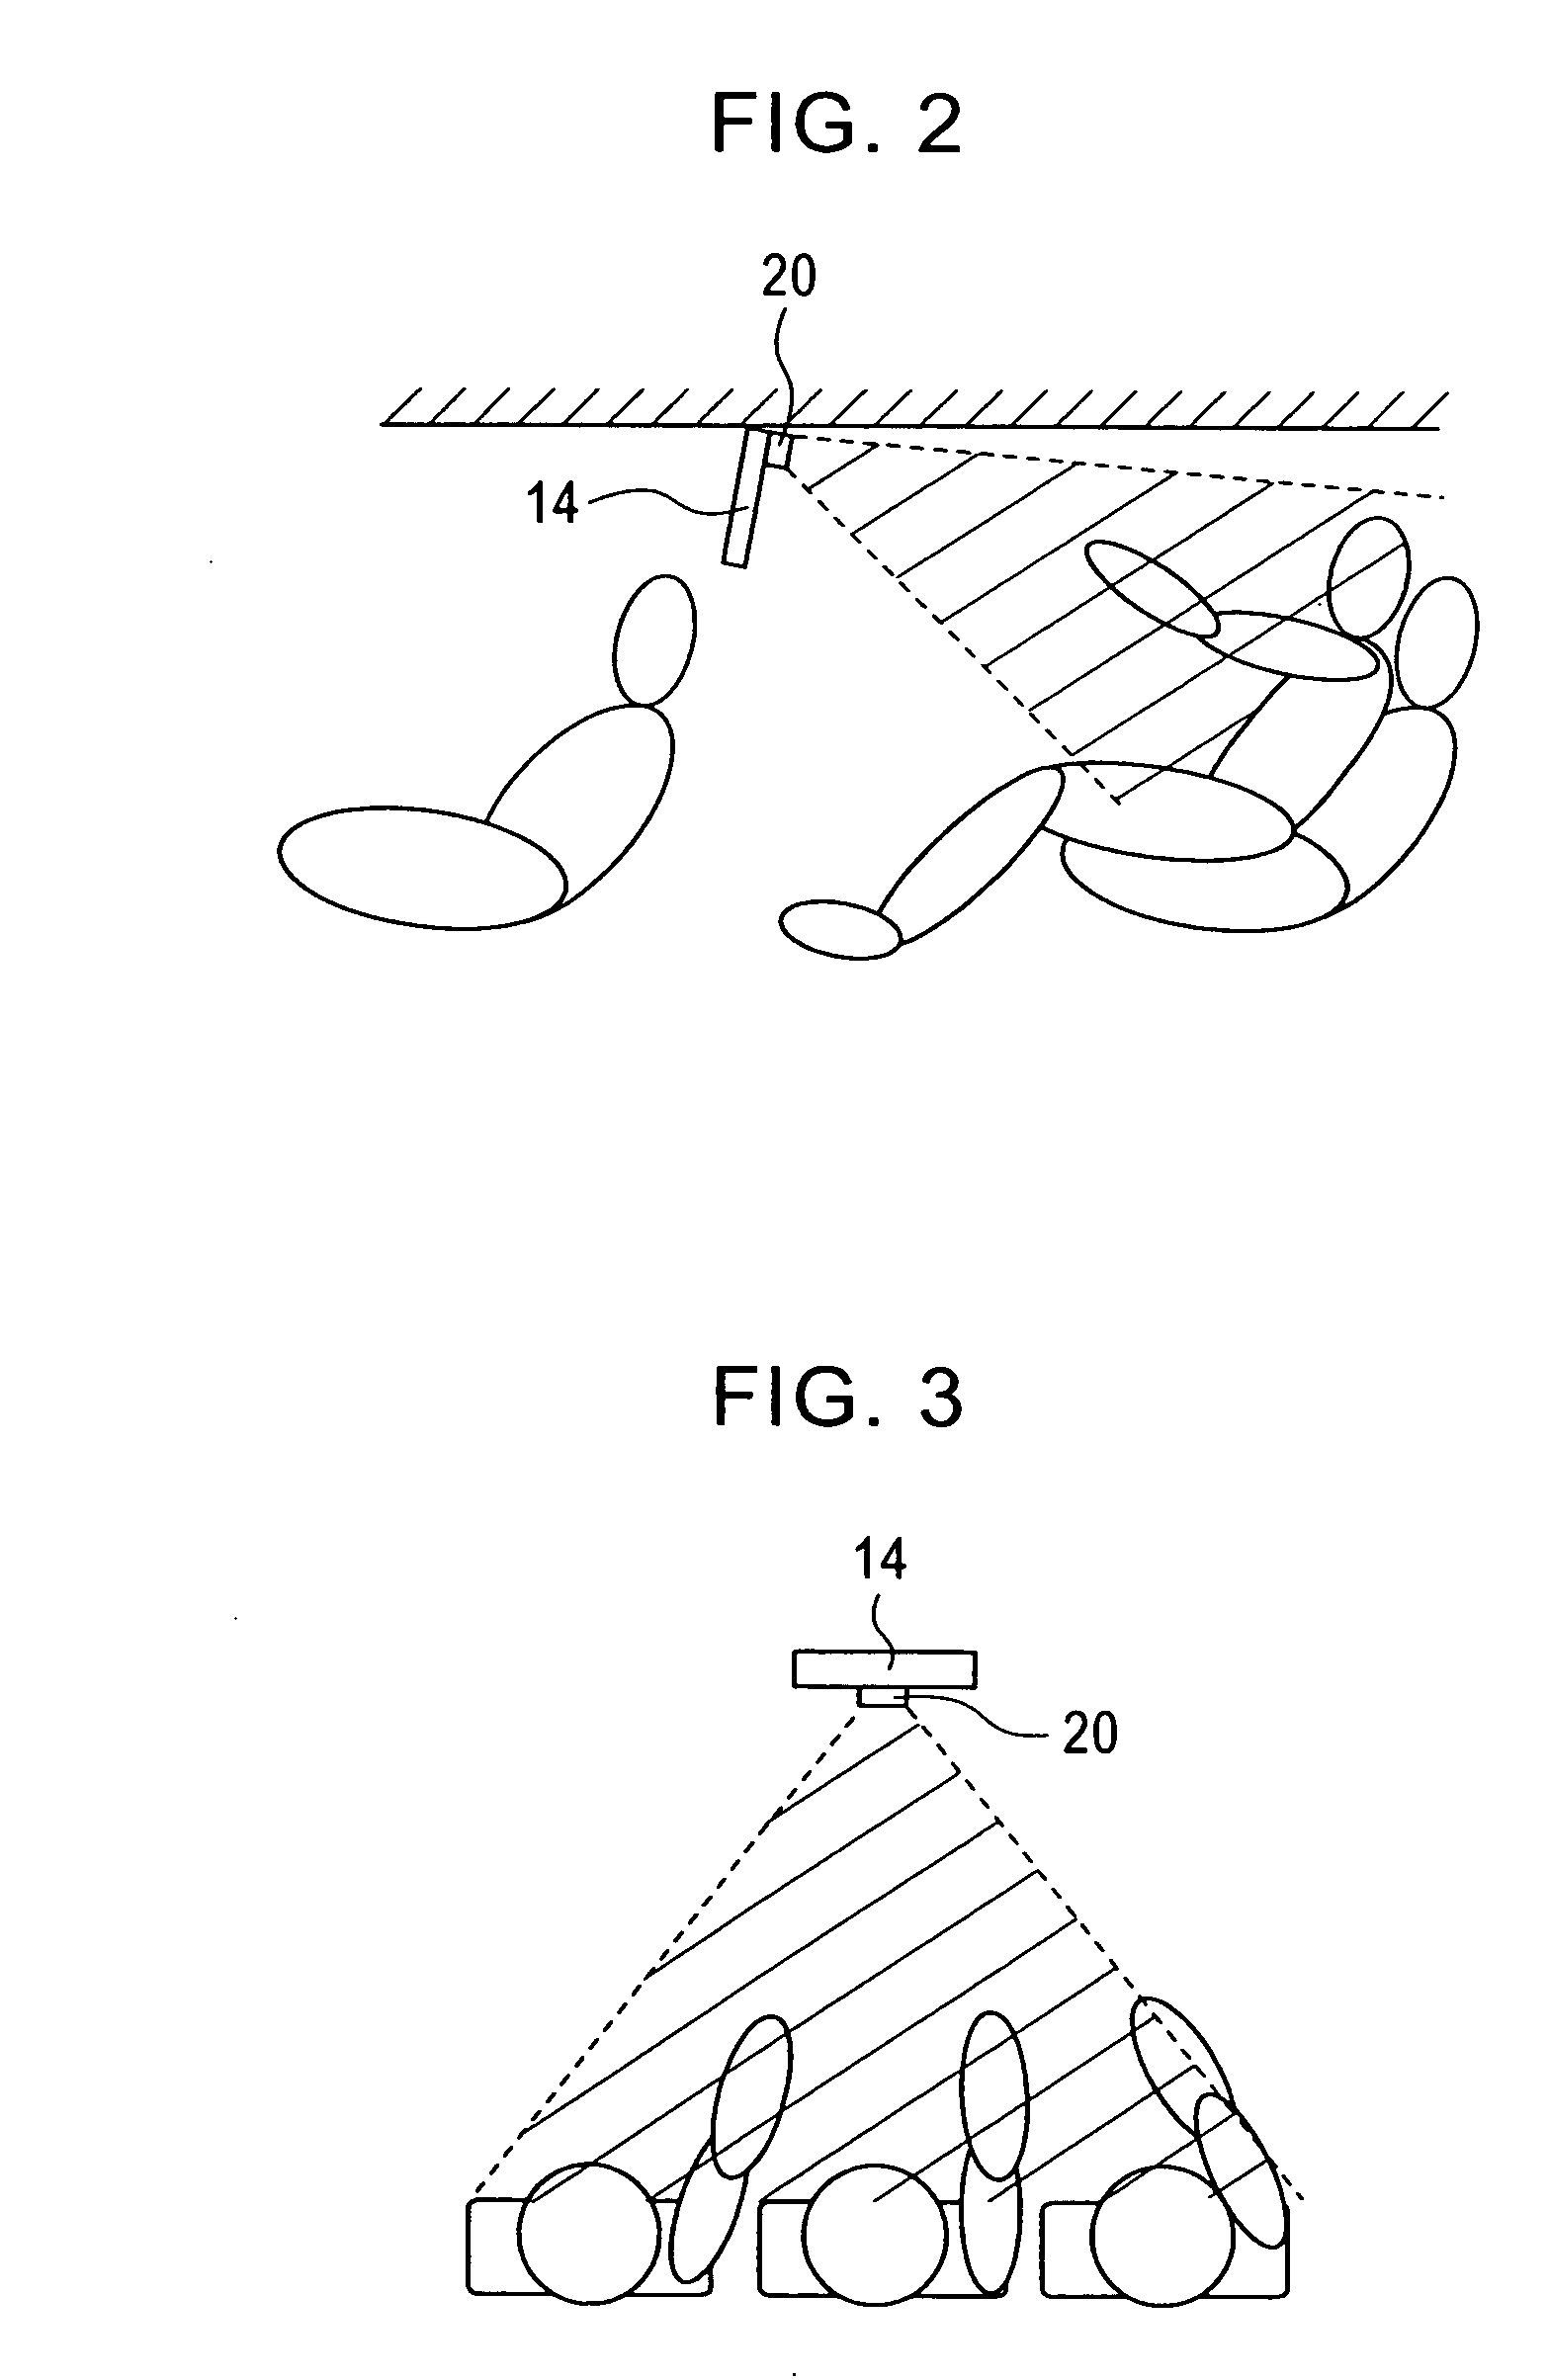 Apparatus and method for inputting commands